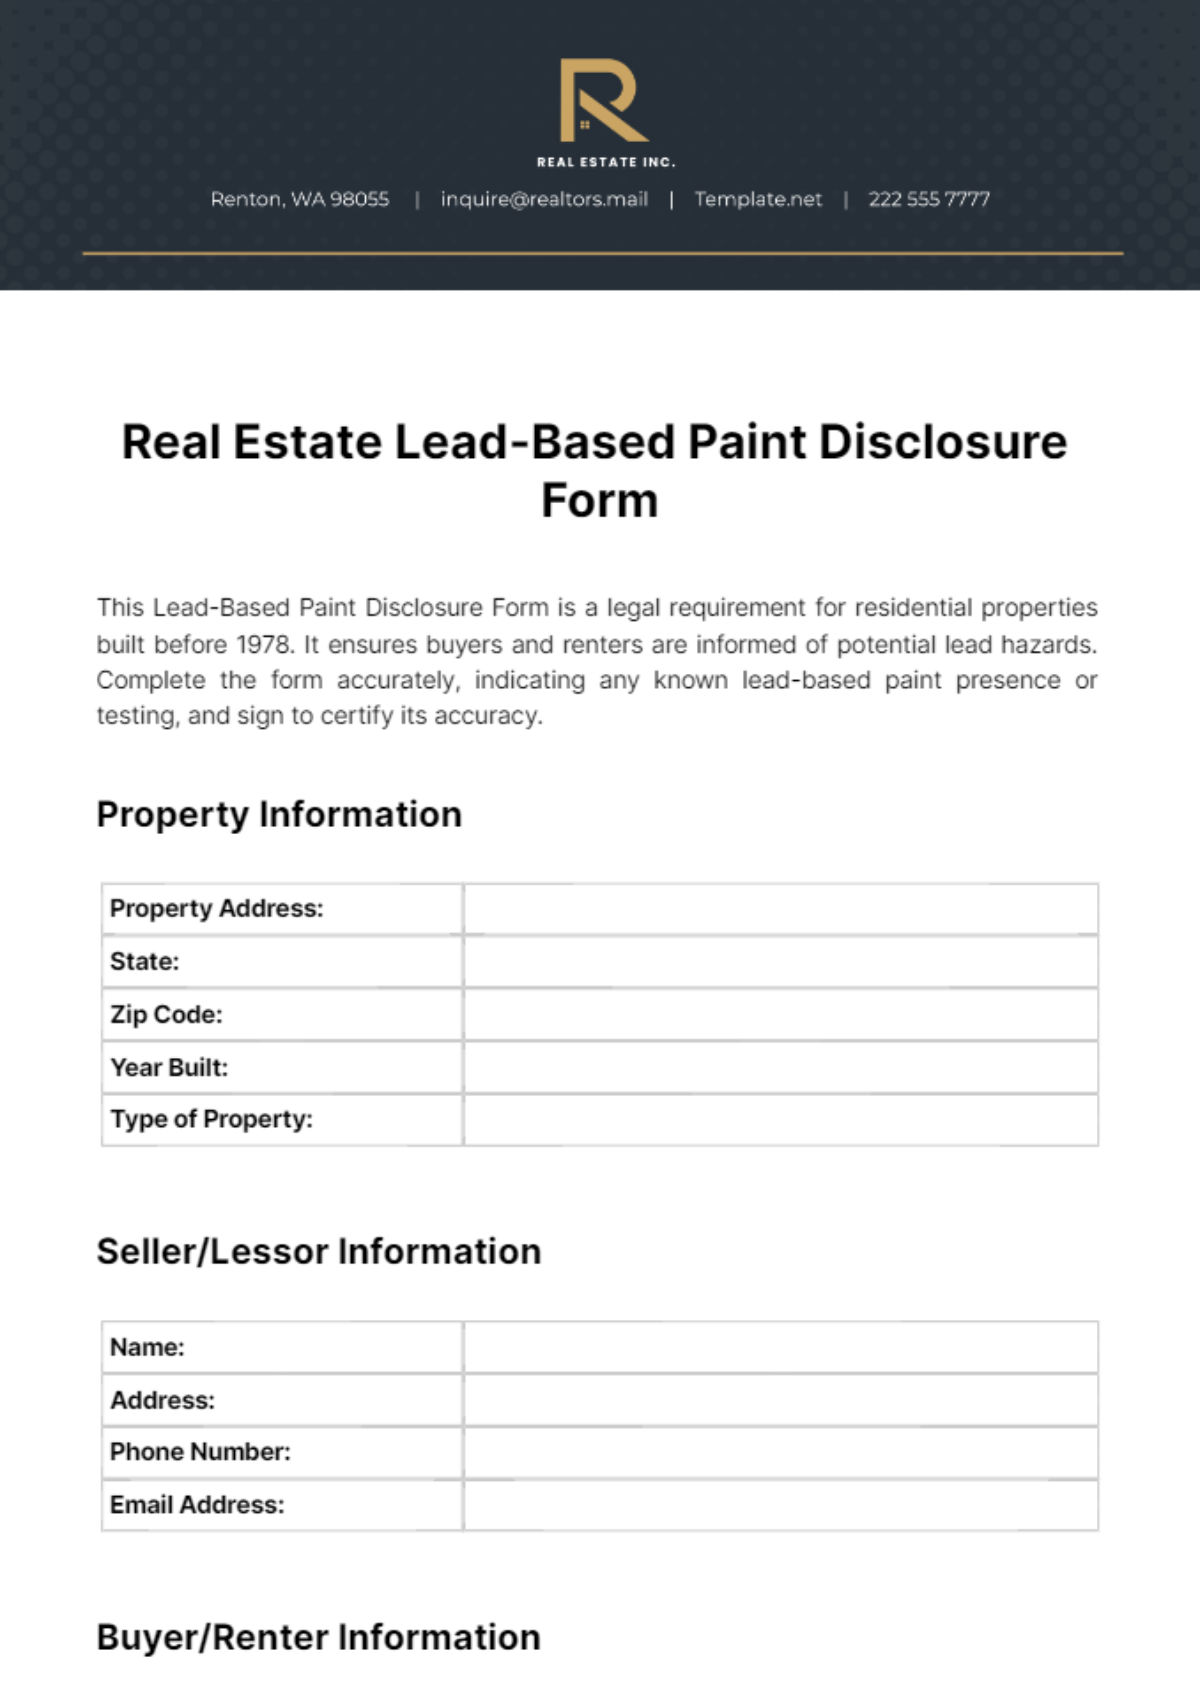 Real Estate Lead-Based Paint Disclosure Form Template